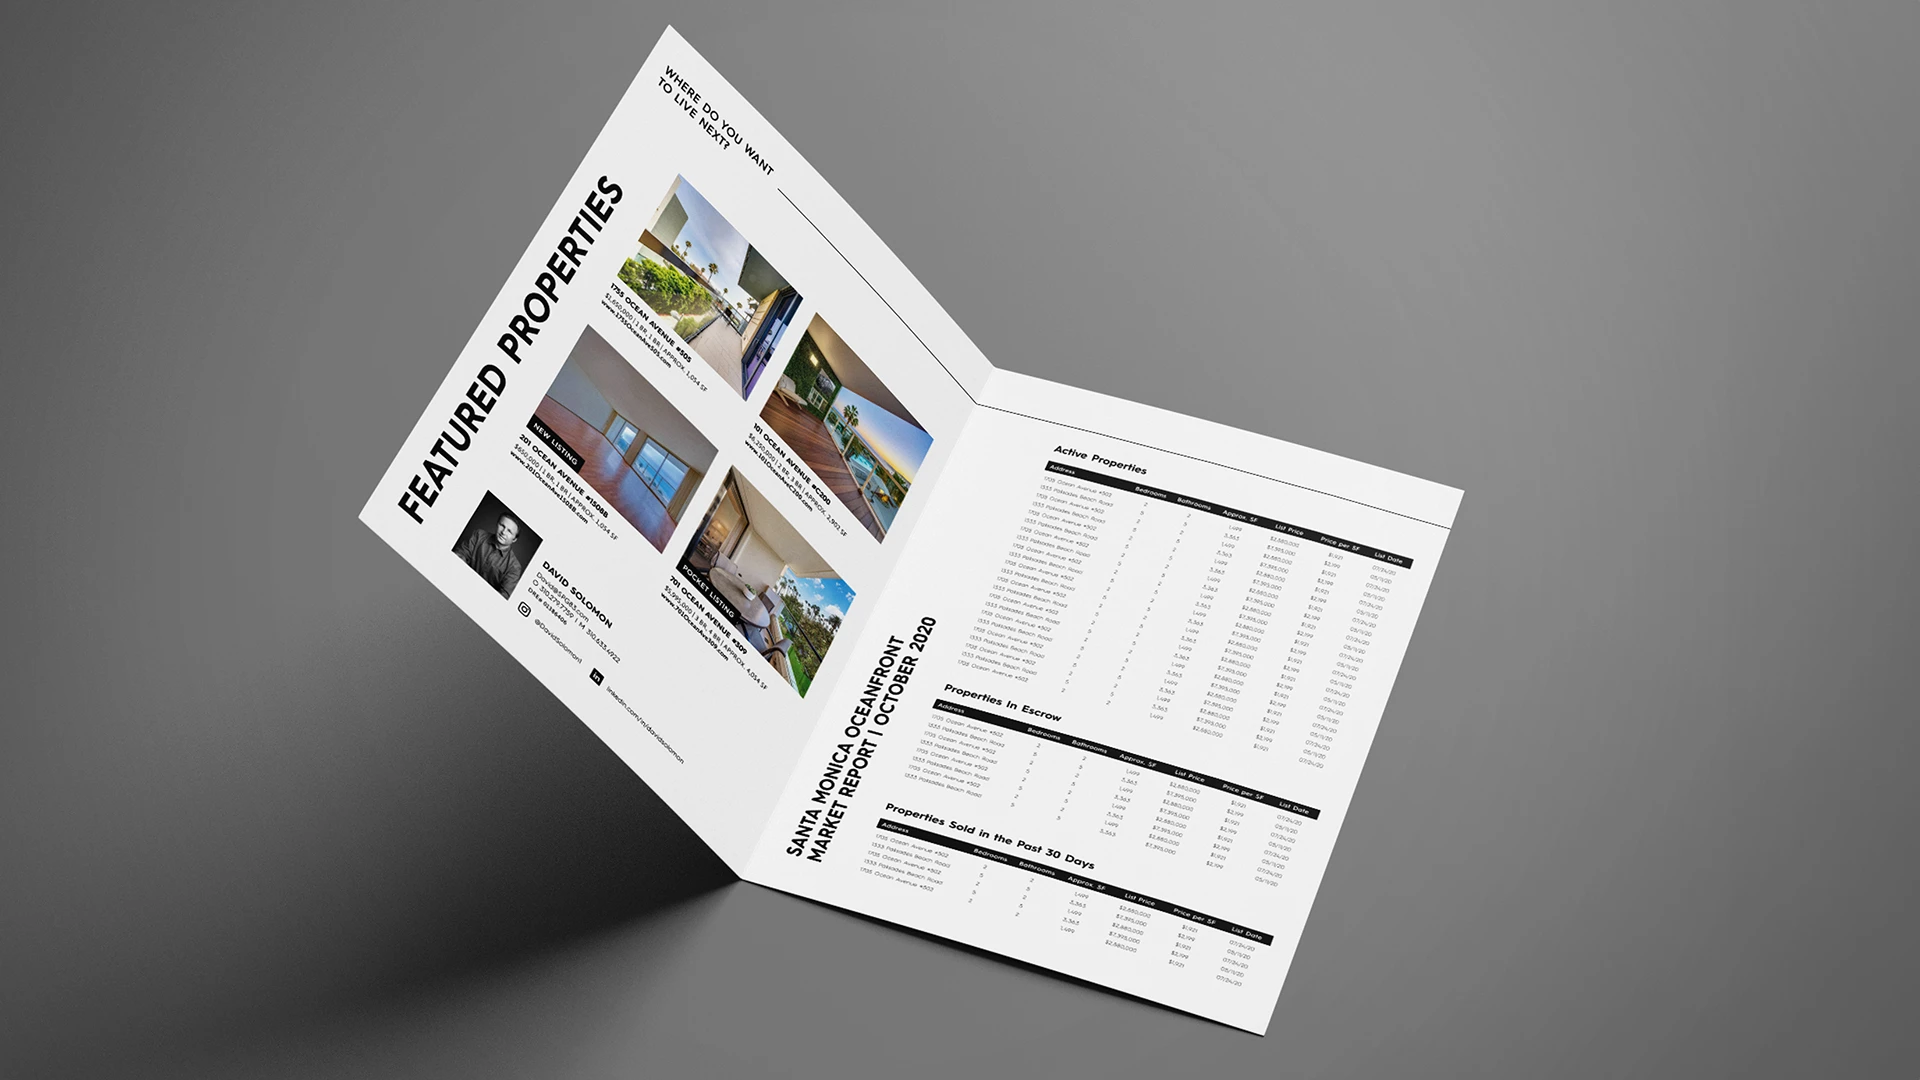 The Solomon Property Group mailable monthly market bi-fold flyer, interior spread.